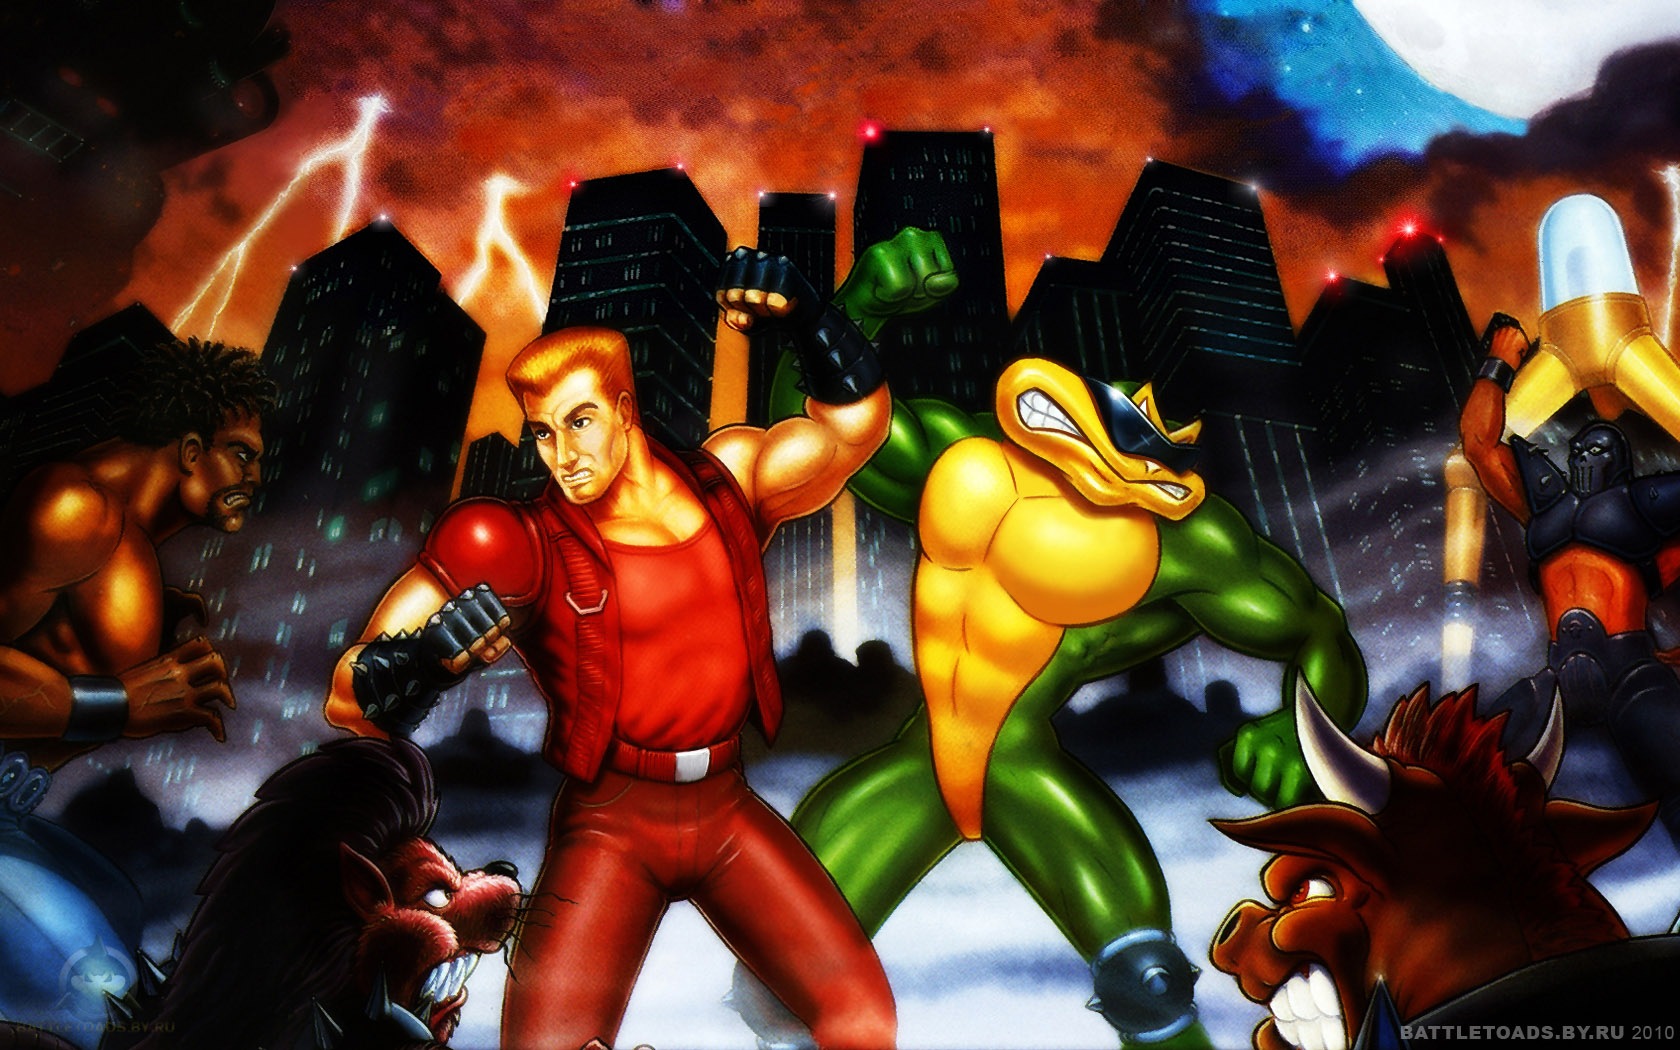 download battletoads double dragon snes for free